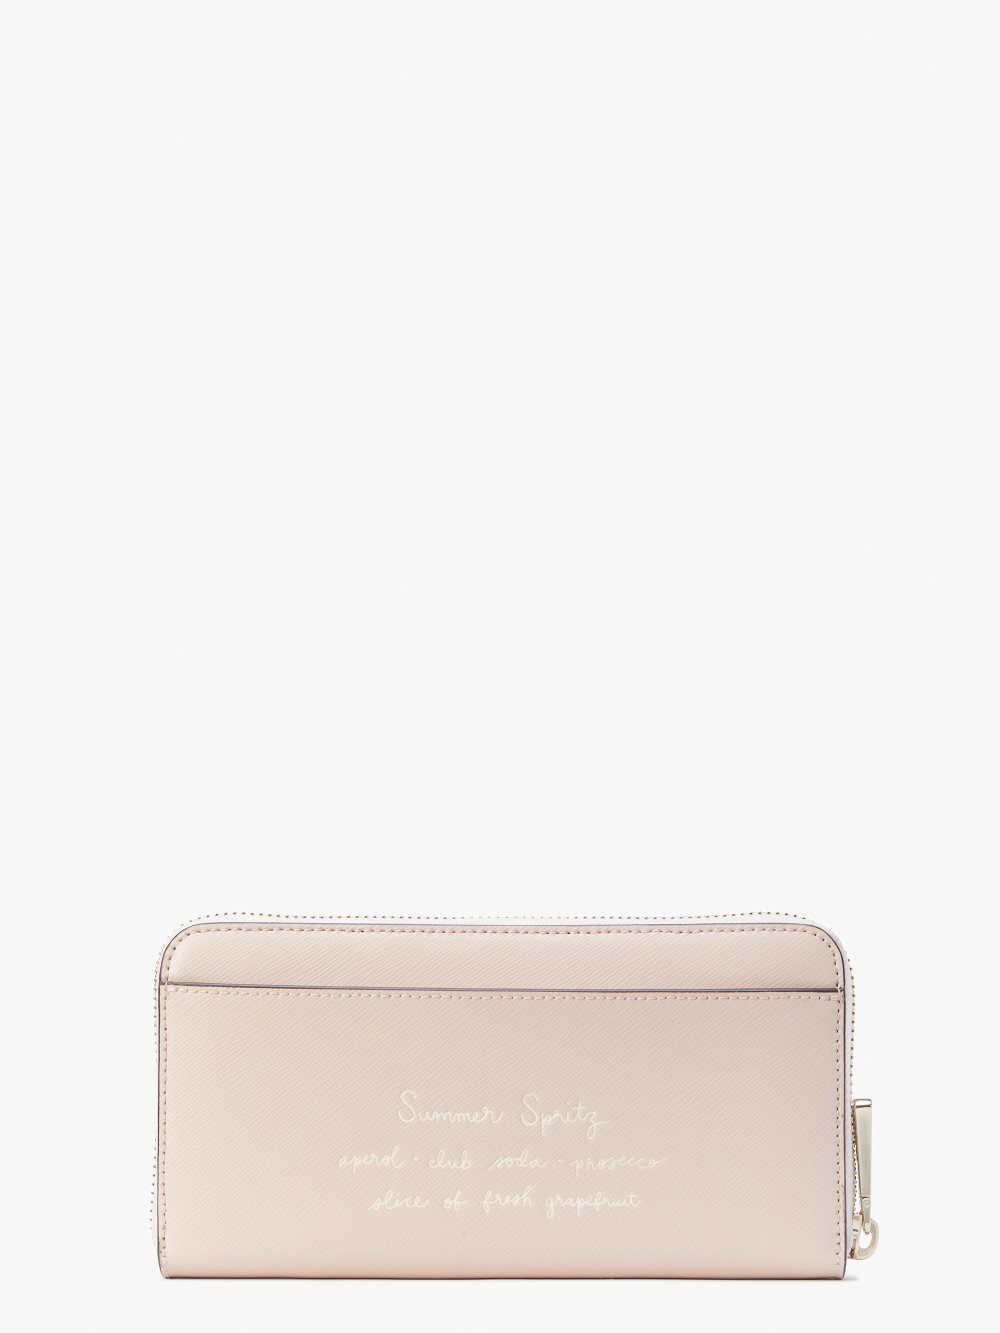 Women's pale dogwood tini embellished zip-around continental wallet | Kate Spade